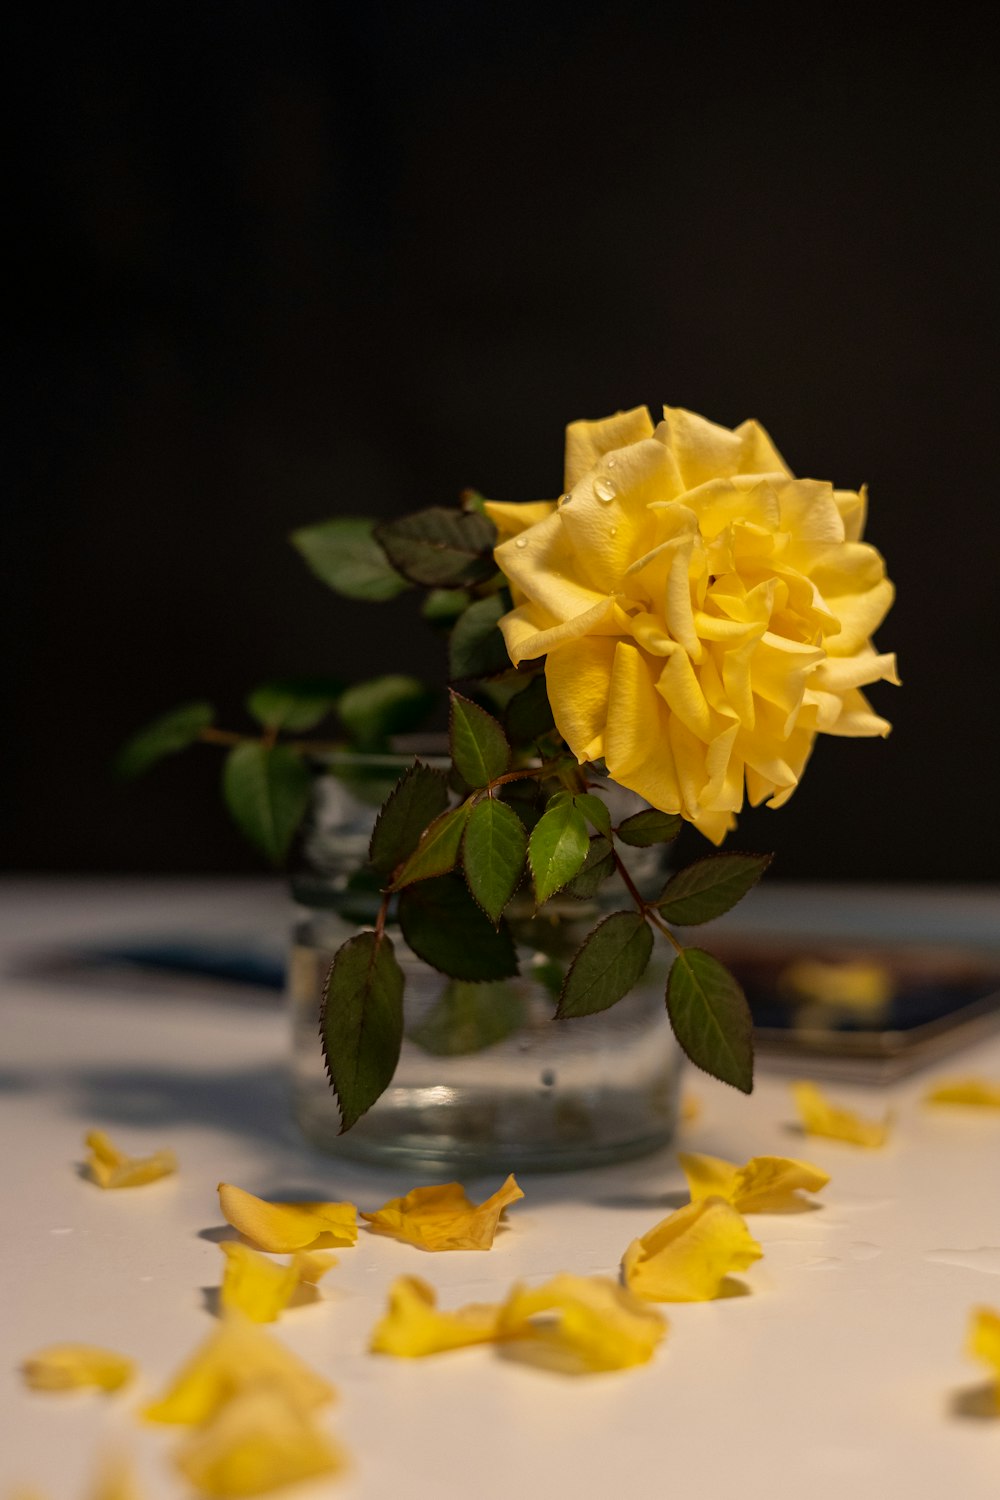 a yellow rose in a glass vase on a table